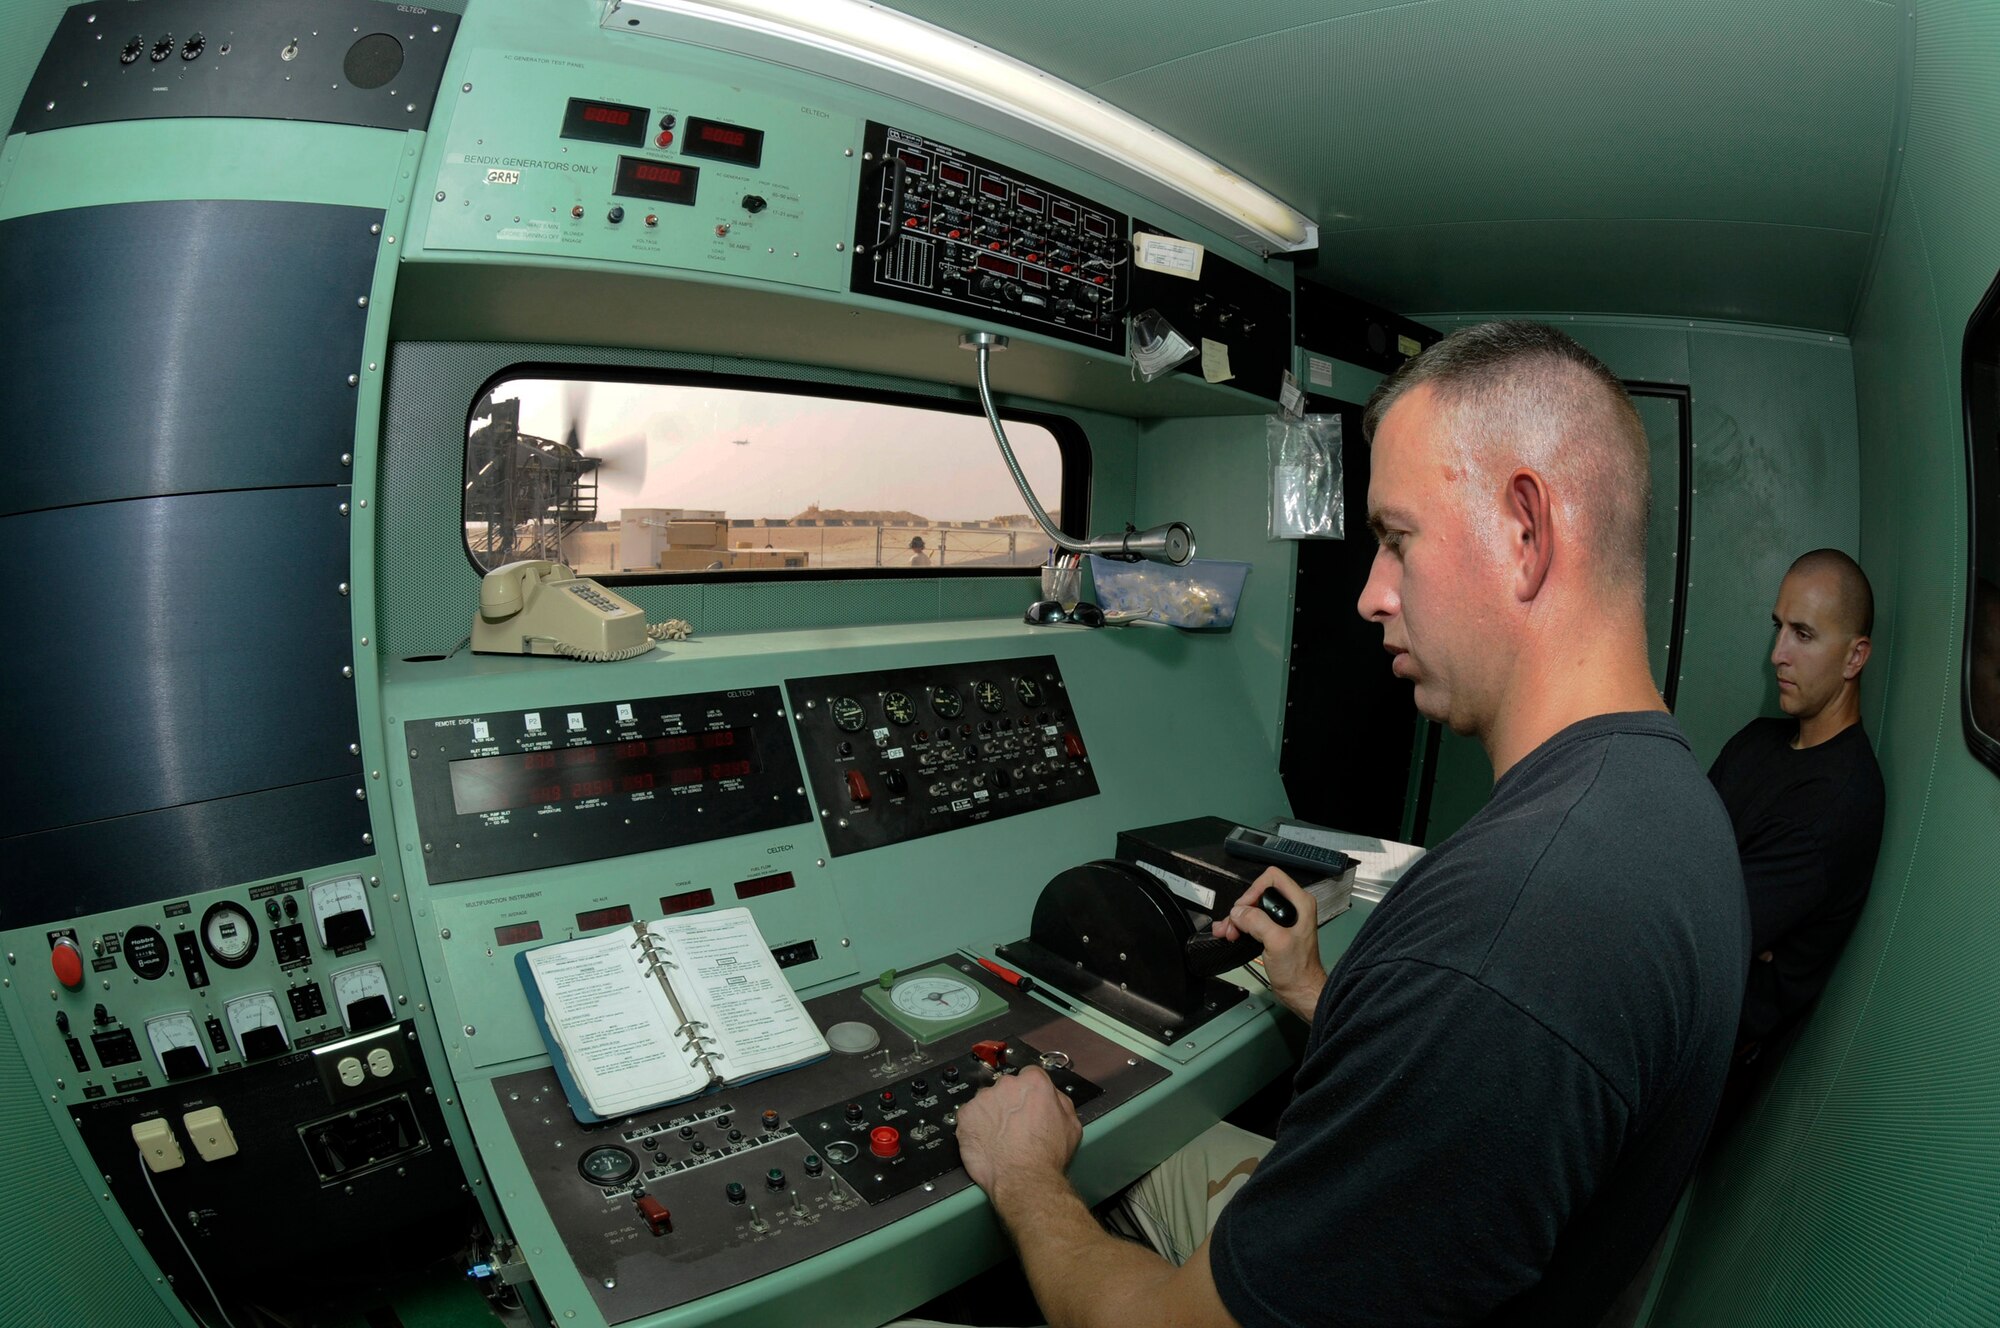 Tech. Sgt. Gregory Mathes, 379th Expeditionary Maintenance Squadron, works the throttle in the control booth during an engine operations test as Senior Airman Beau Columbus, 379 EMXS, watches and records all results Sept. 3, 2008, at an undisclosed air base in Southwest Asia.  The C-130 Hercules primarily performs the tactical portion of the airlift mission. The aircraft is capable of operating from rough, dirt strips and is the prime transport for air dropping troops and equipment into hostile areas.  Sergeant Mathes, a native of Greenville, Tenn., is deployed from Ramstein Air Force Base, Germany and Airman Columbus, originally from Buffalo, N.Y., is deployed from Yokota Air Base, Japan.  Both are supporting Operations Iraqi and Enduring Freedom and Joint Task Force-Horn of Africa. (U. S. Air Force photo by Tech. Sgt. Michael Boquette/Released)